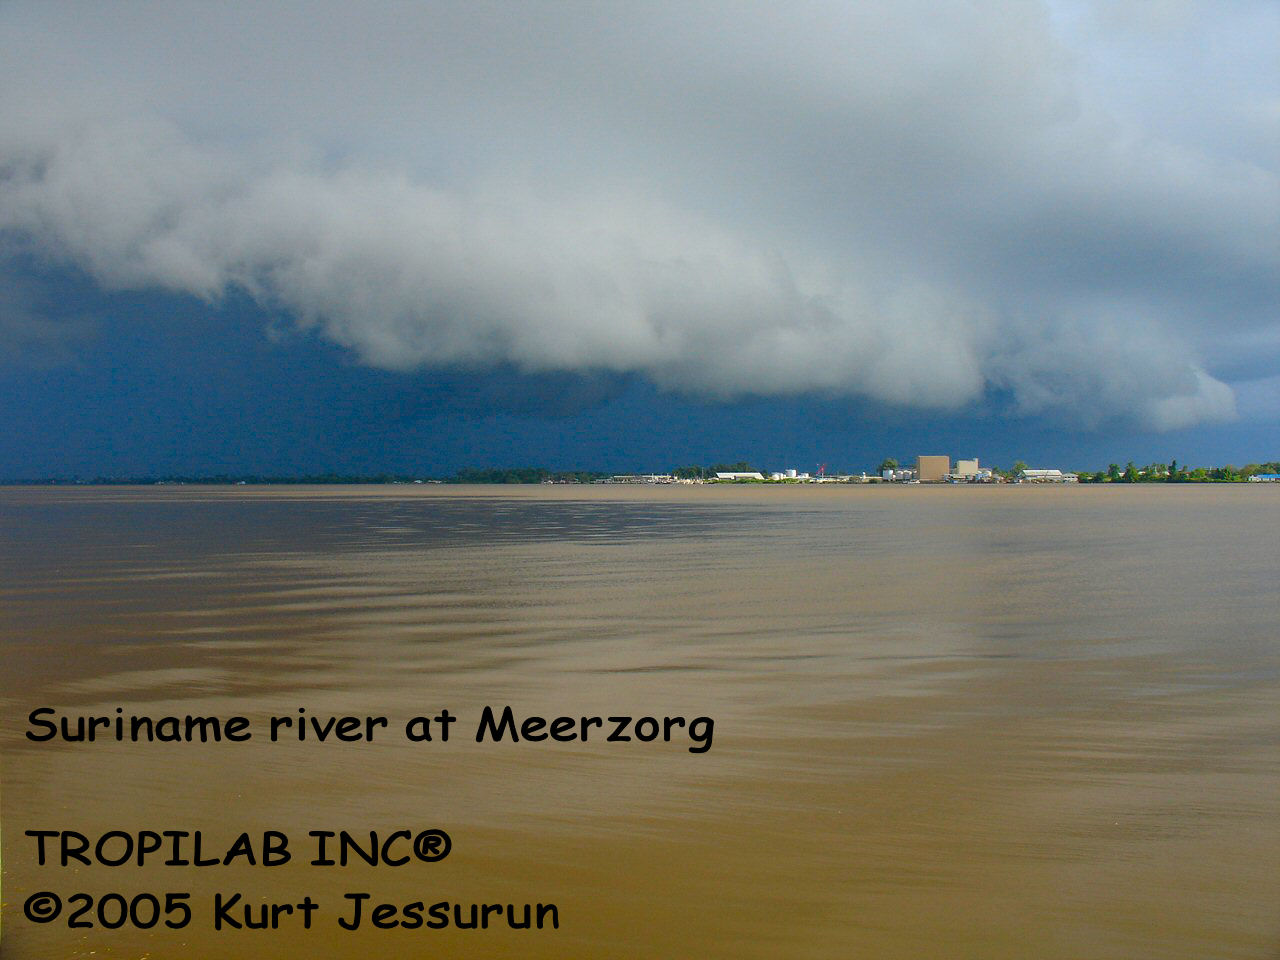 Suriname river at Meerzorg